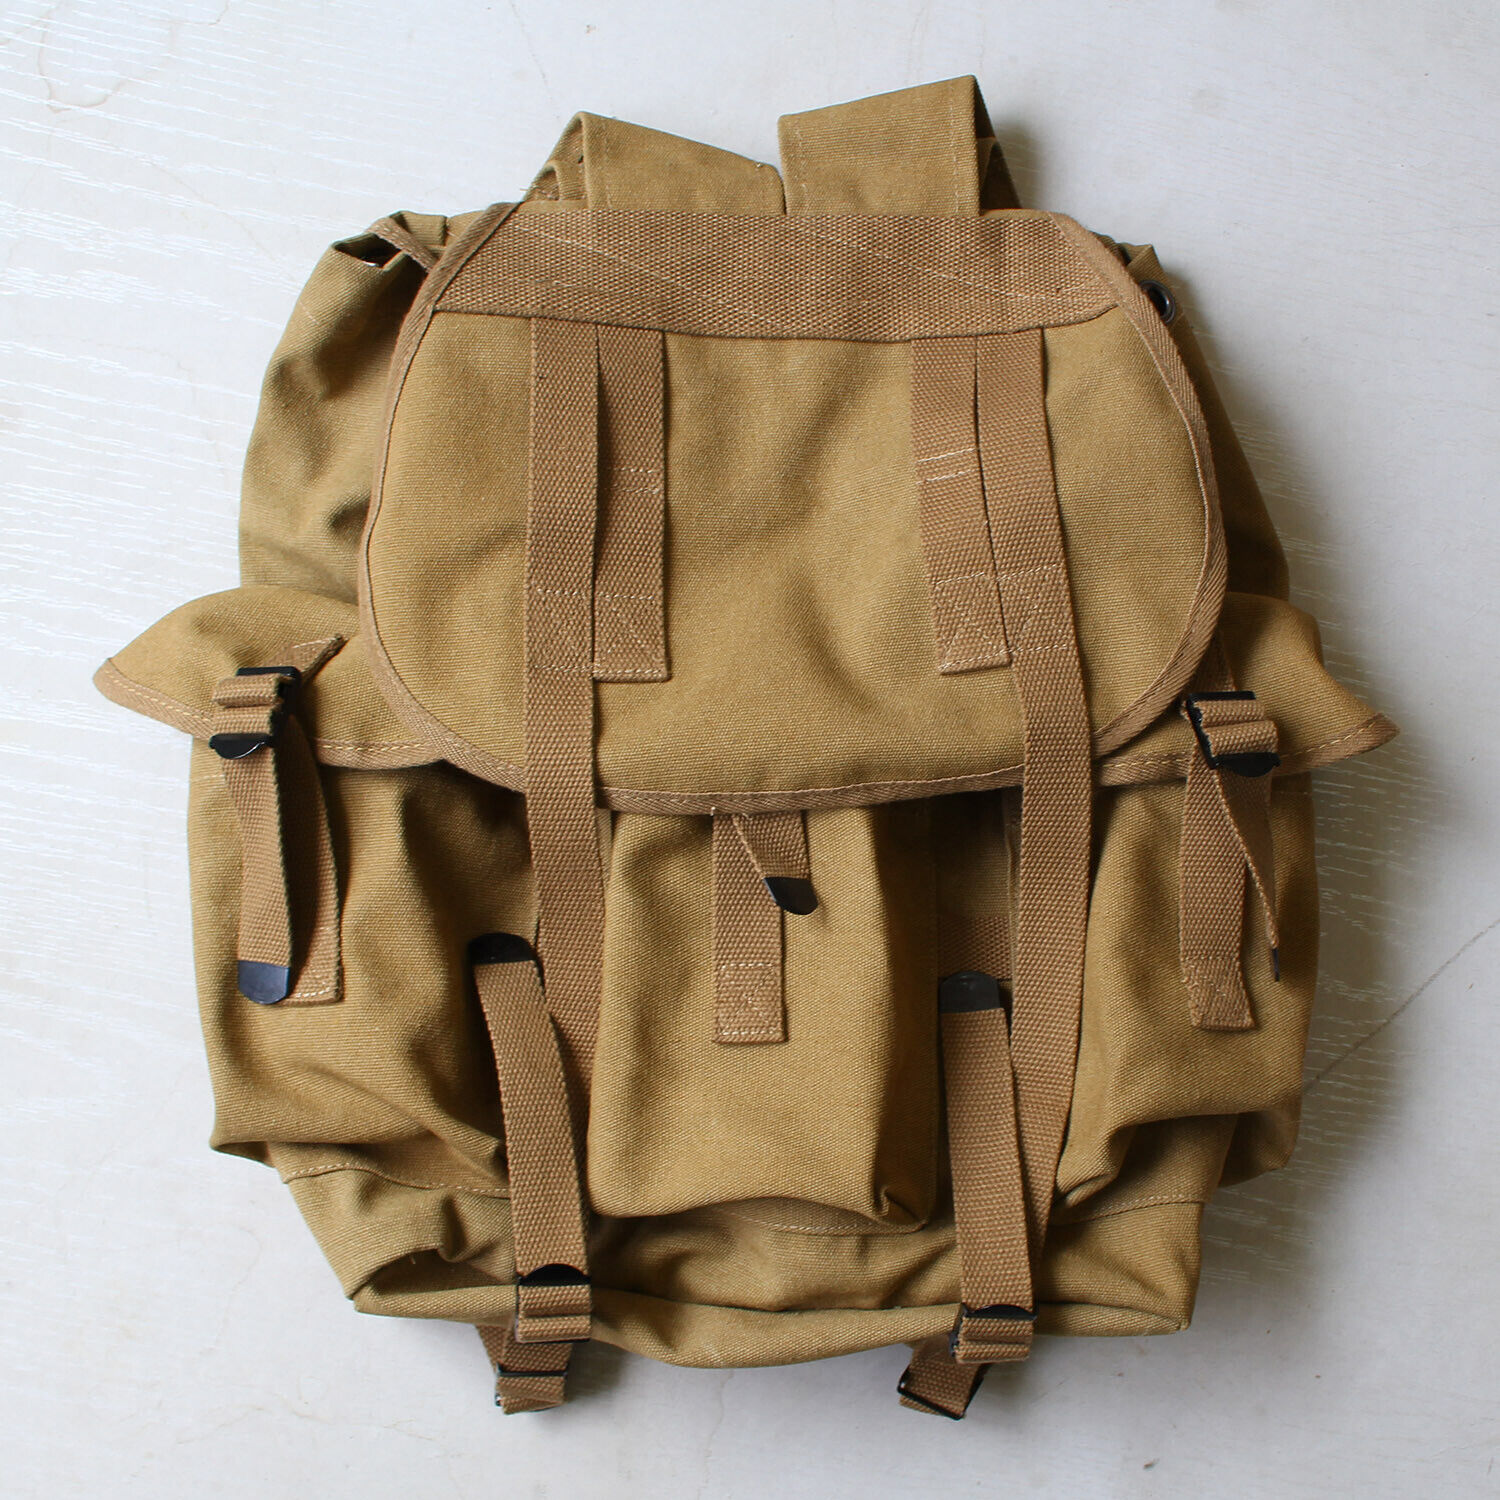 WW2 US Model.14 Haversack Canvas Field Bag Backpack Large WWII ARMY INFANTRY